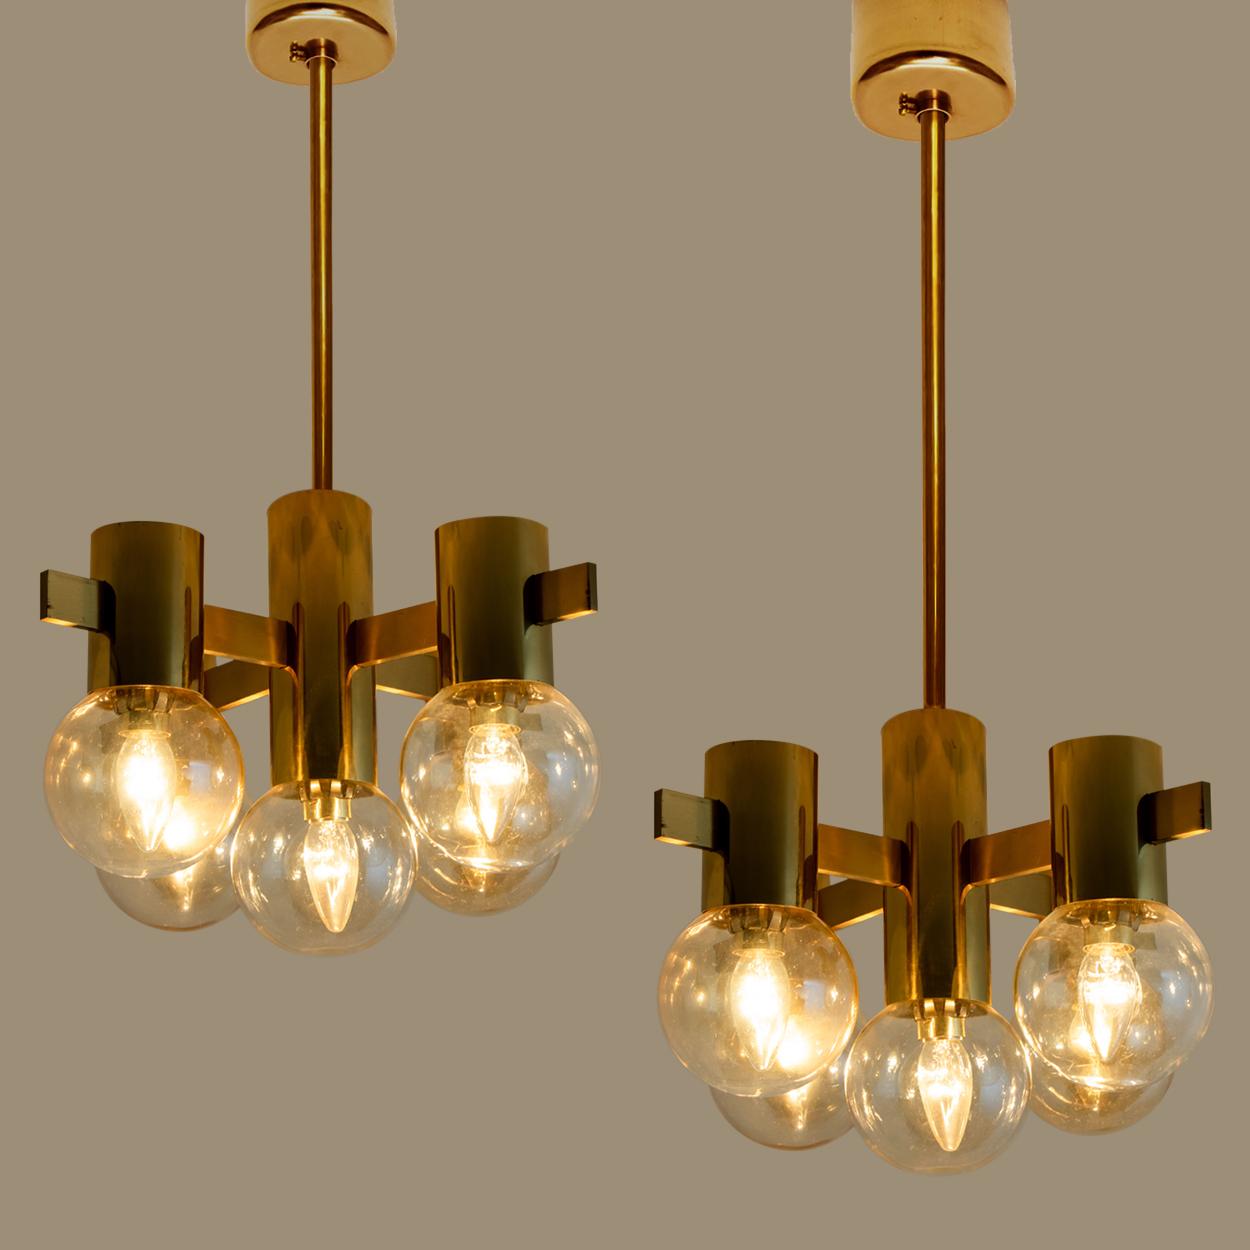 This stunning pair of large brass light fixtures with smoked glass bowls and gold-plated fittings was produced in the 1970s in the style of Hans-Agne Jakobsson. Illuminates beautifully.

Size of the chandelier:
D 18.1